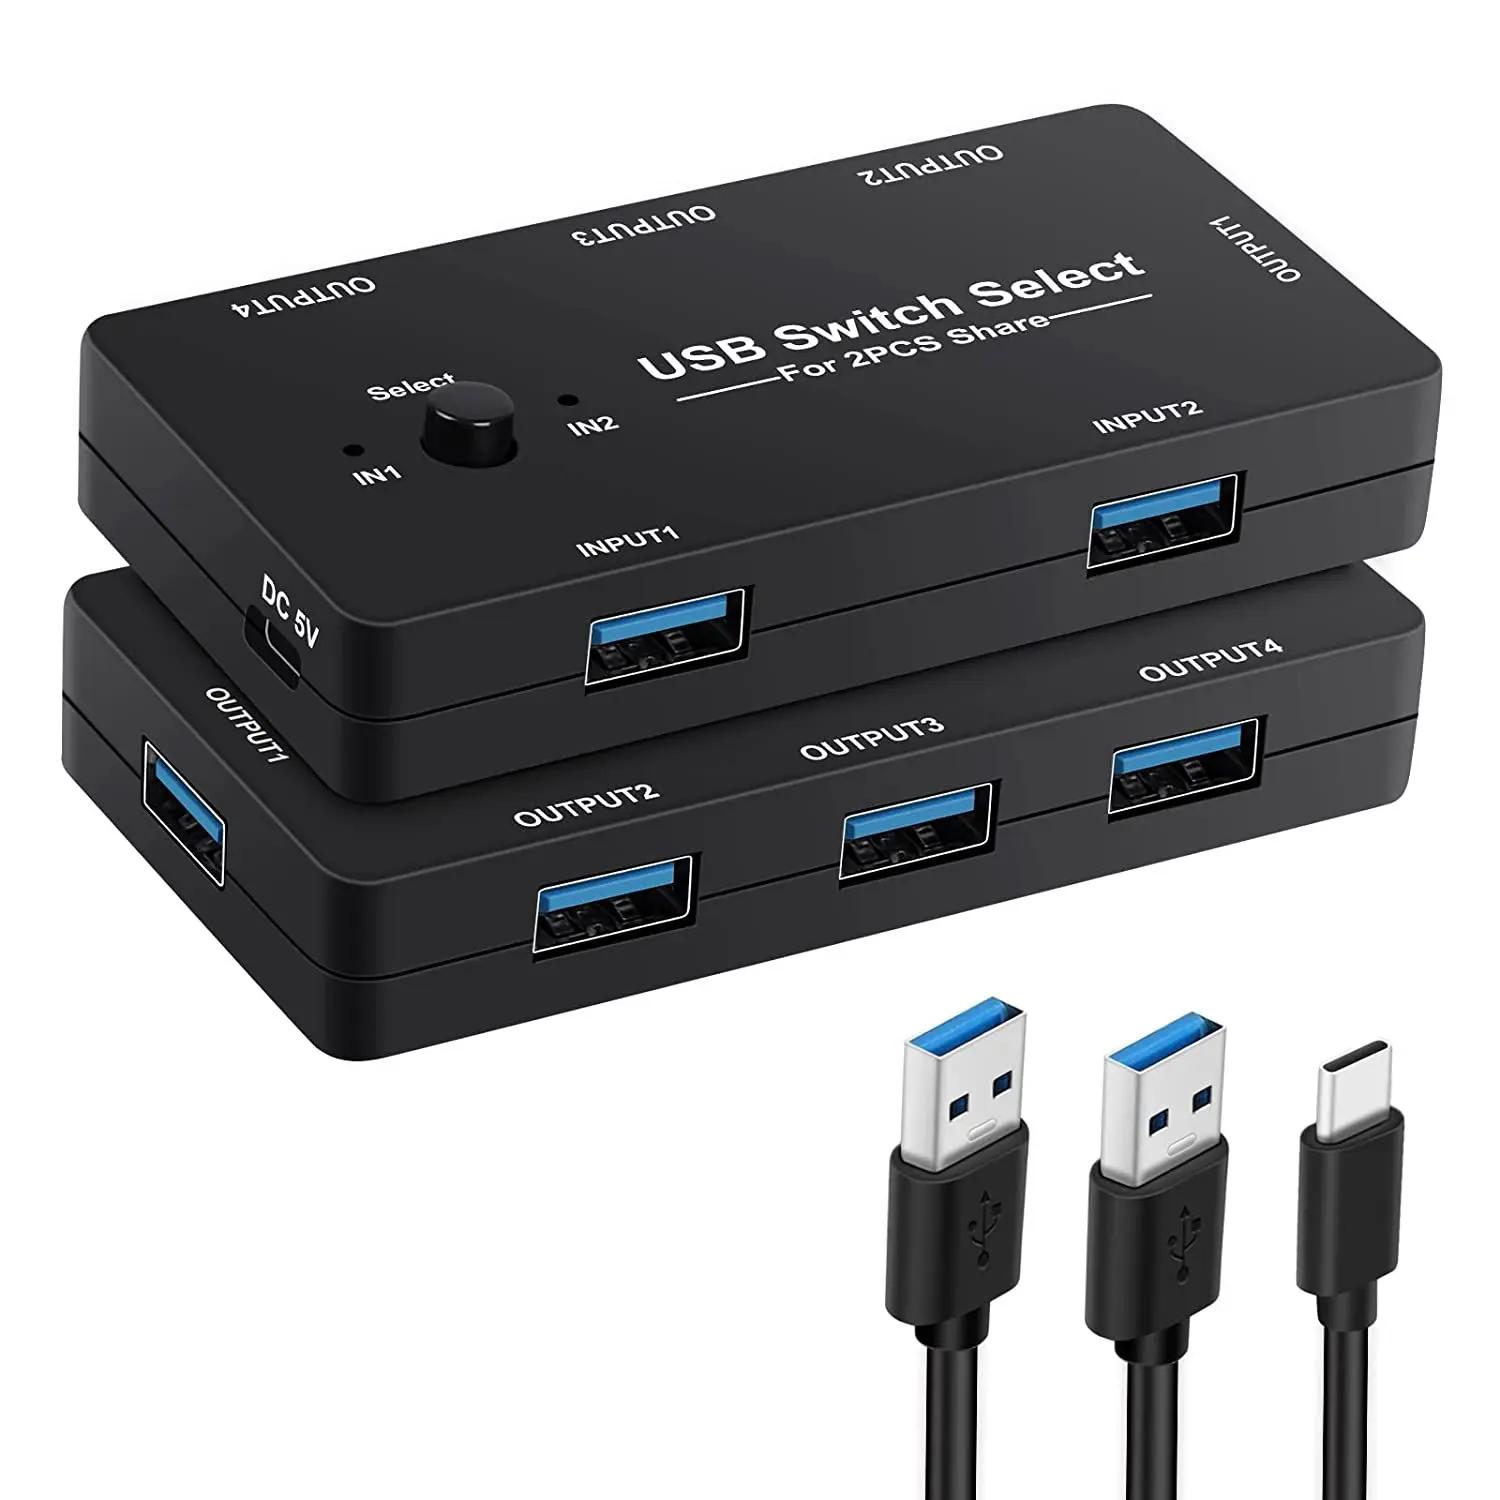  ȣ ȯ USB  ĳ ũ ñ ġ ڽ, USB2.0 KVM ó ø, 2 in 4 Out, 2 in 2 Out